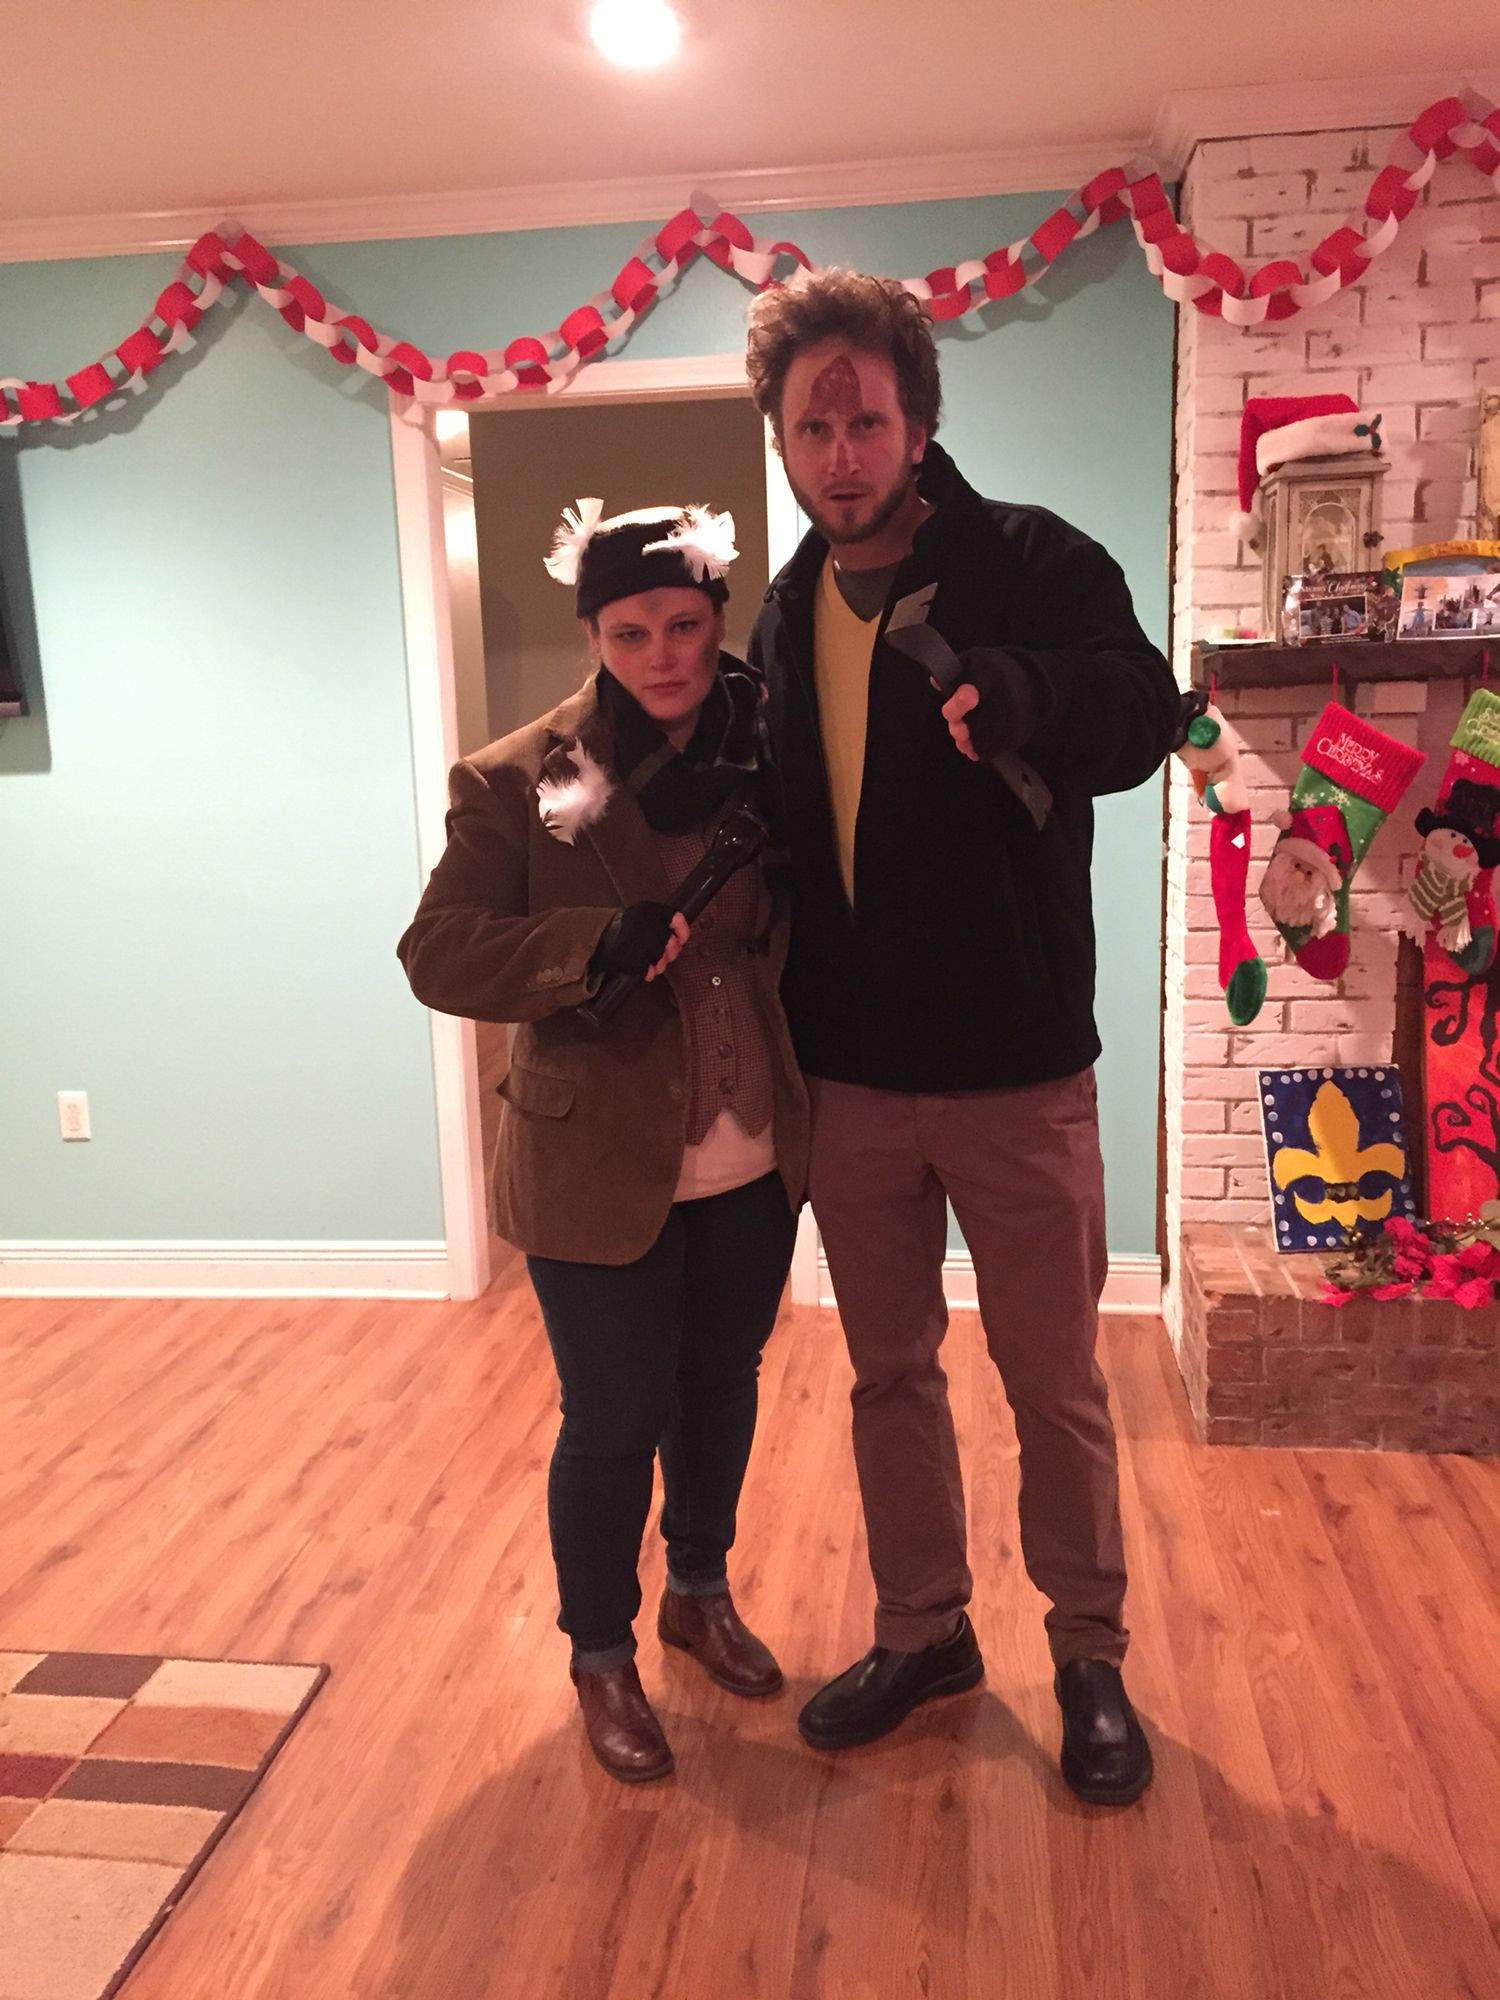 Christmas Costume Party Ideas
 Adult Couple Costume Party Christmas Movie Theme "Harry